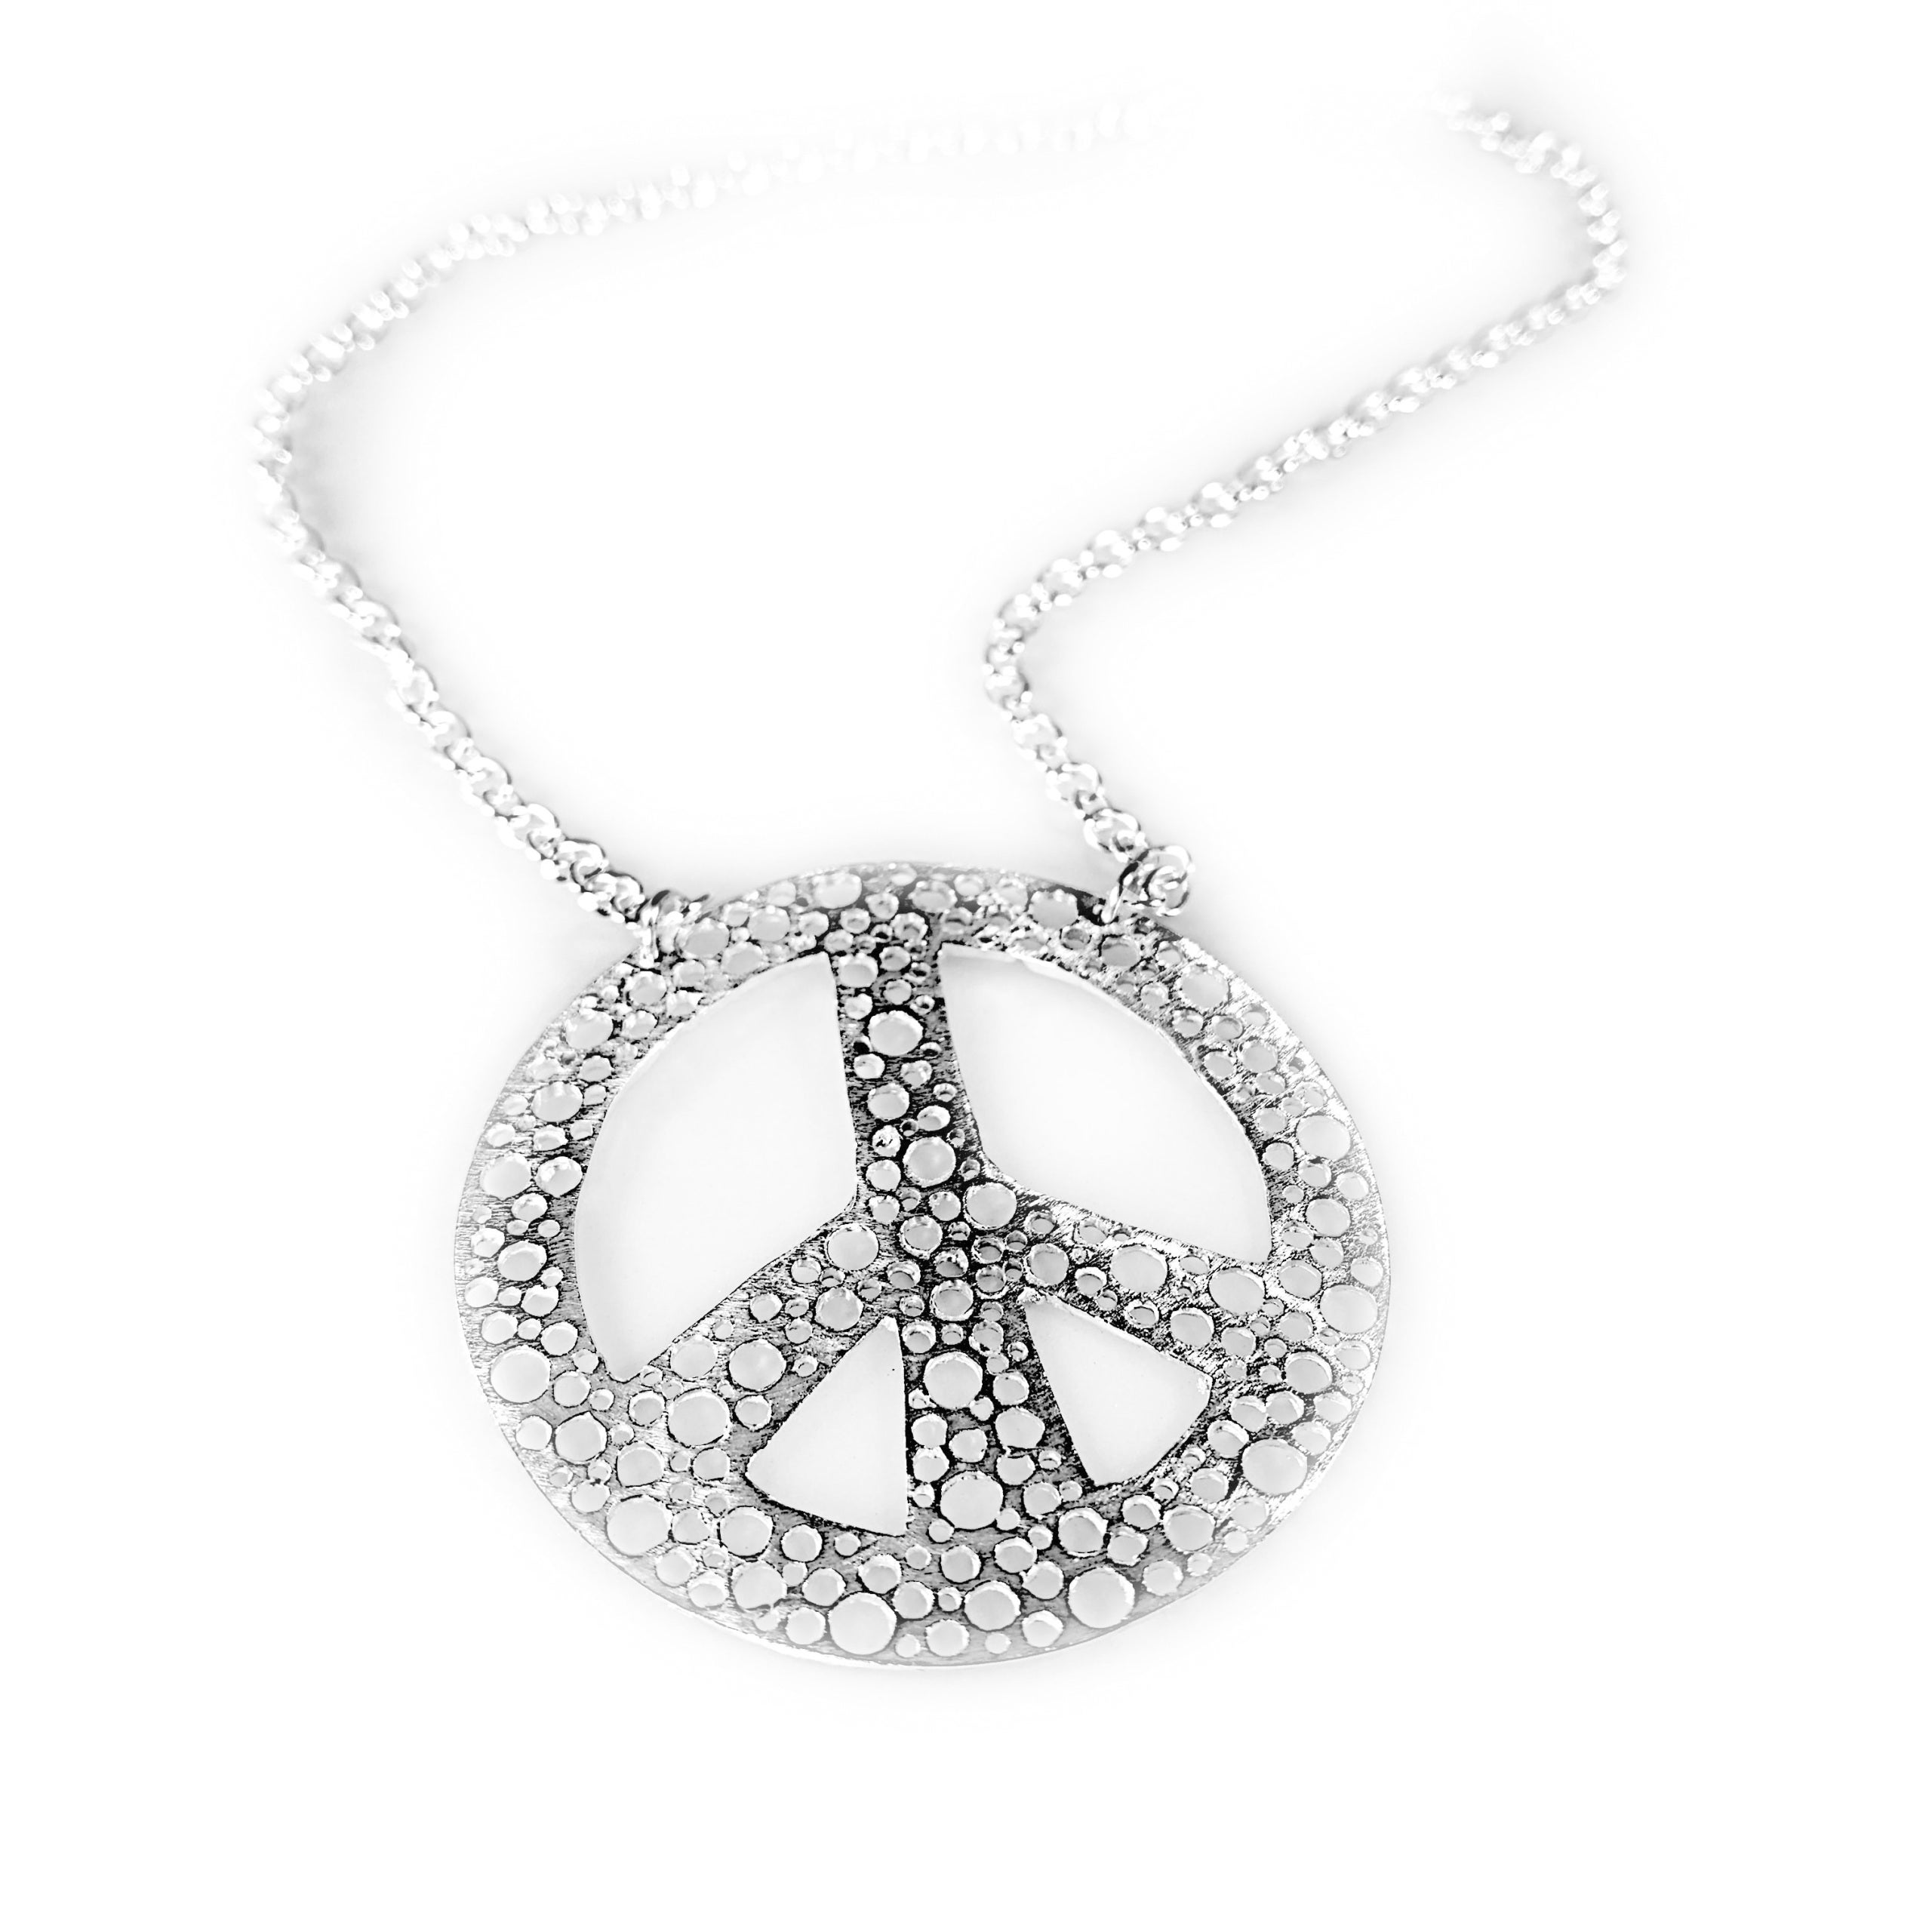 Love and Peace Necklace | Peace Sign Jewelry - Island Cowgirl